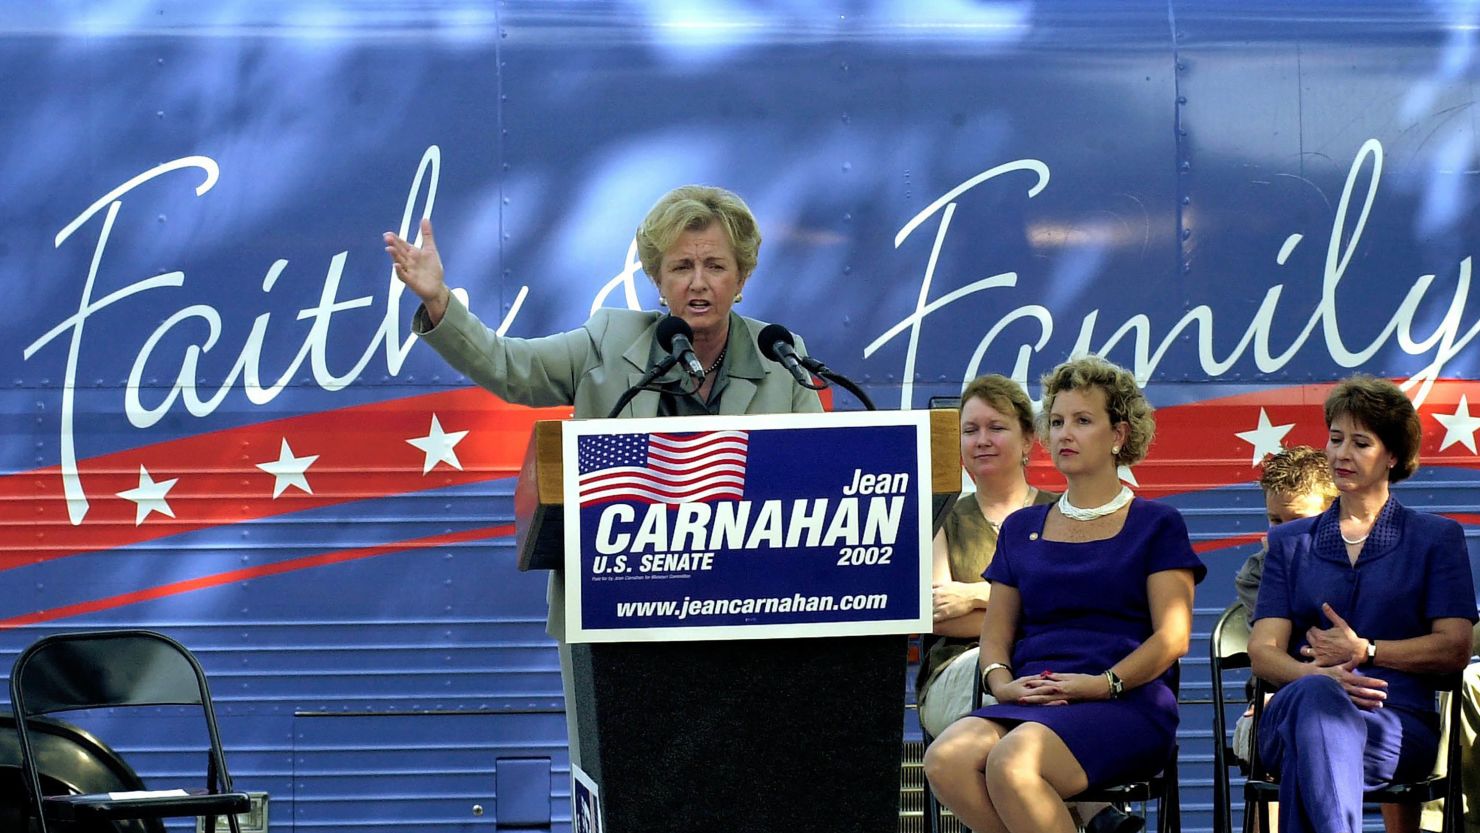 Sen. Jean Carnahan, D. Mo., gestures while addressing supporters during a sendoff rally in St. Louis, Monday, Aug. 12, 2002. Carnahan pledged to fight for working families and corporate accountability Monday as she launched a four-day, 1,500-mile bus tour around Missouri. (AP Photo/James A. Finley)